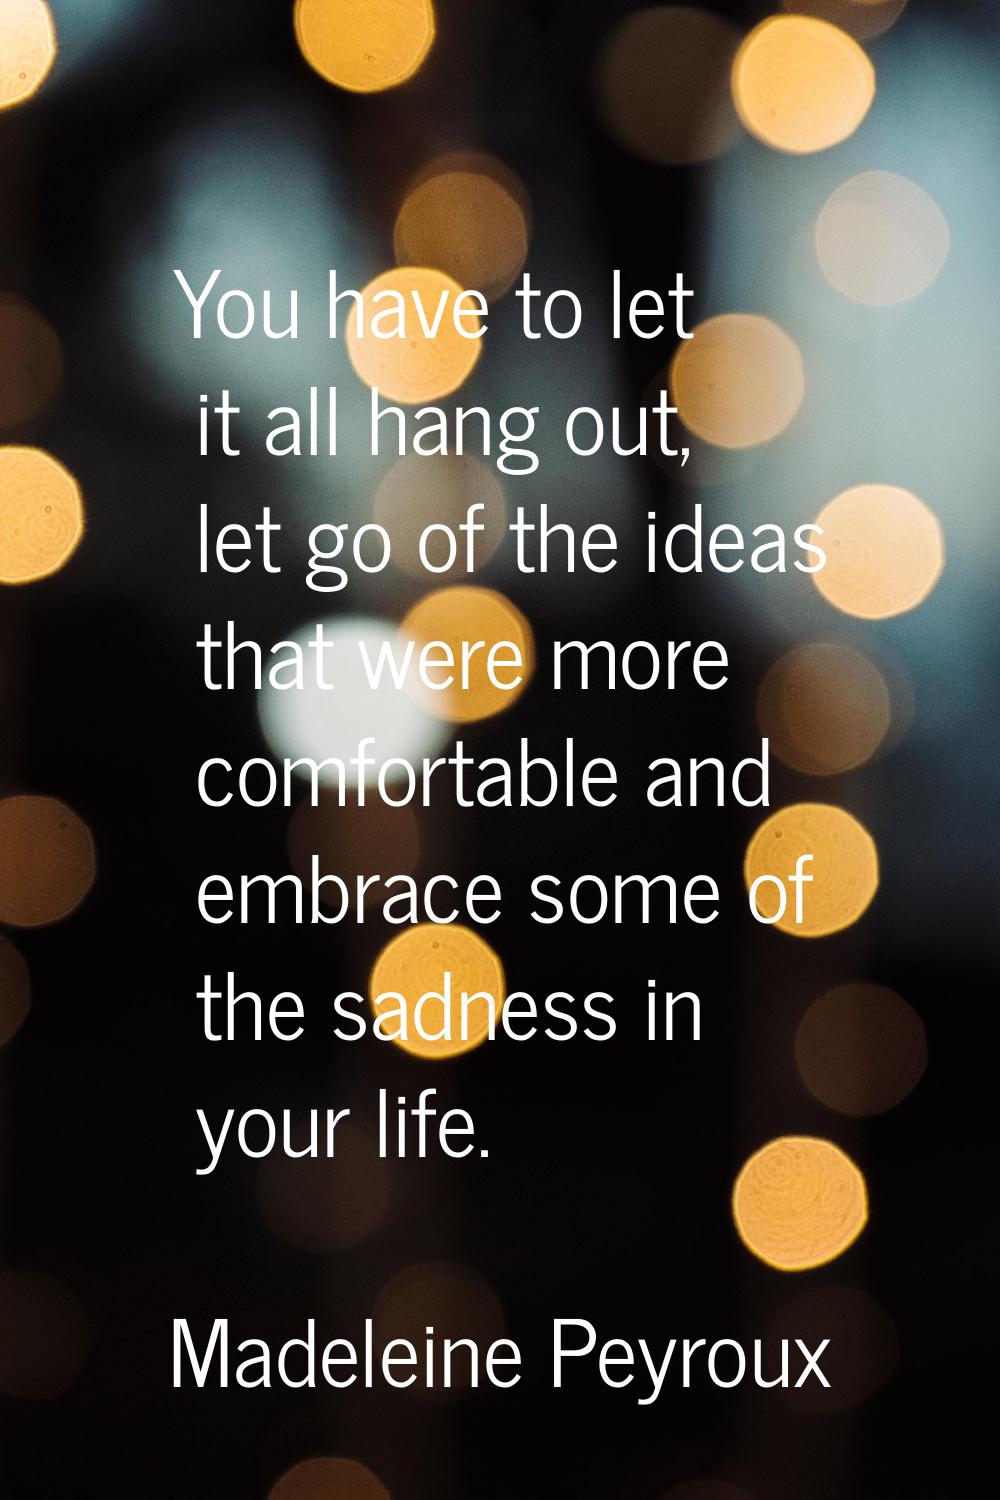 You have to let it all hang out, let go of the ideas that were more comfortable and embrace some of